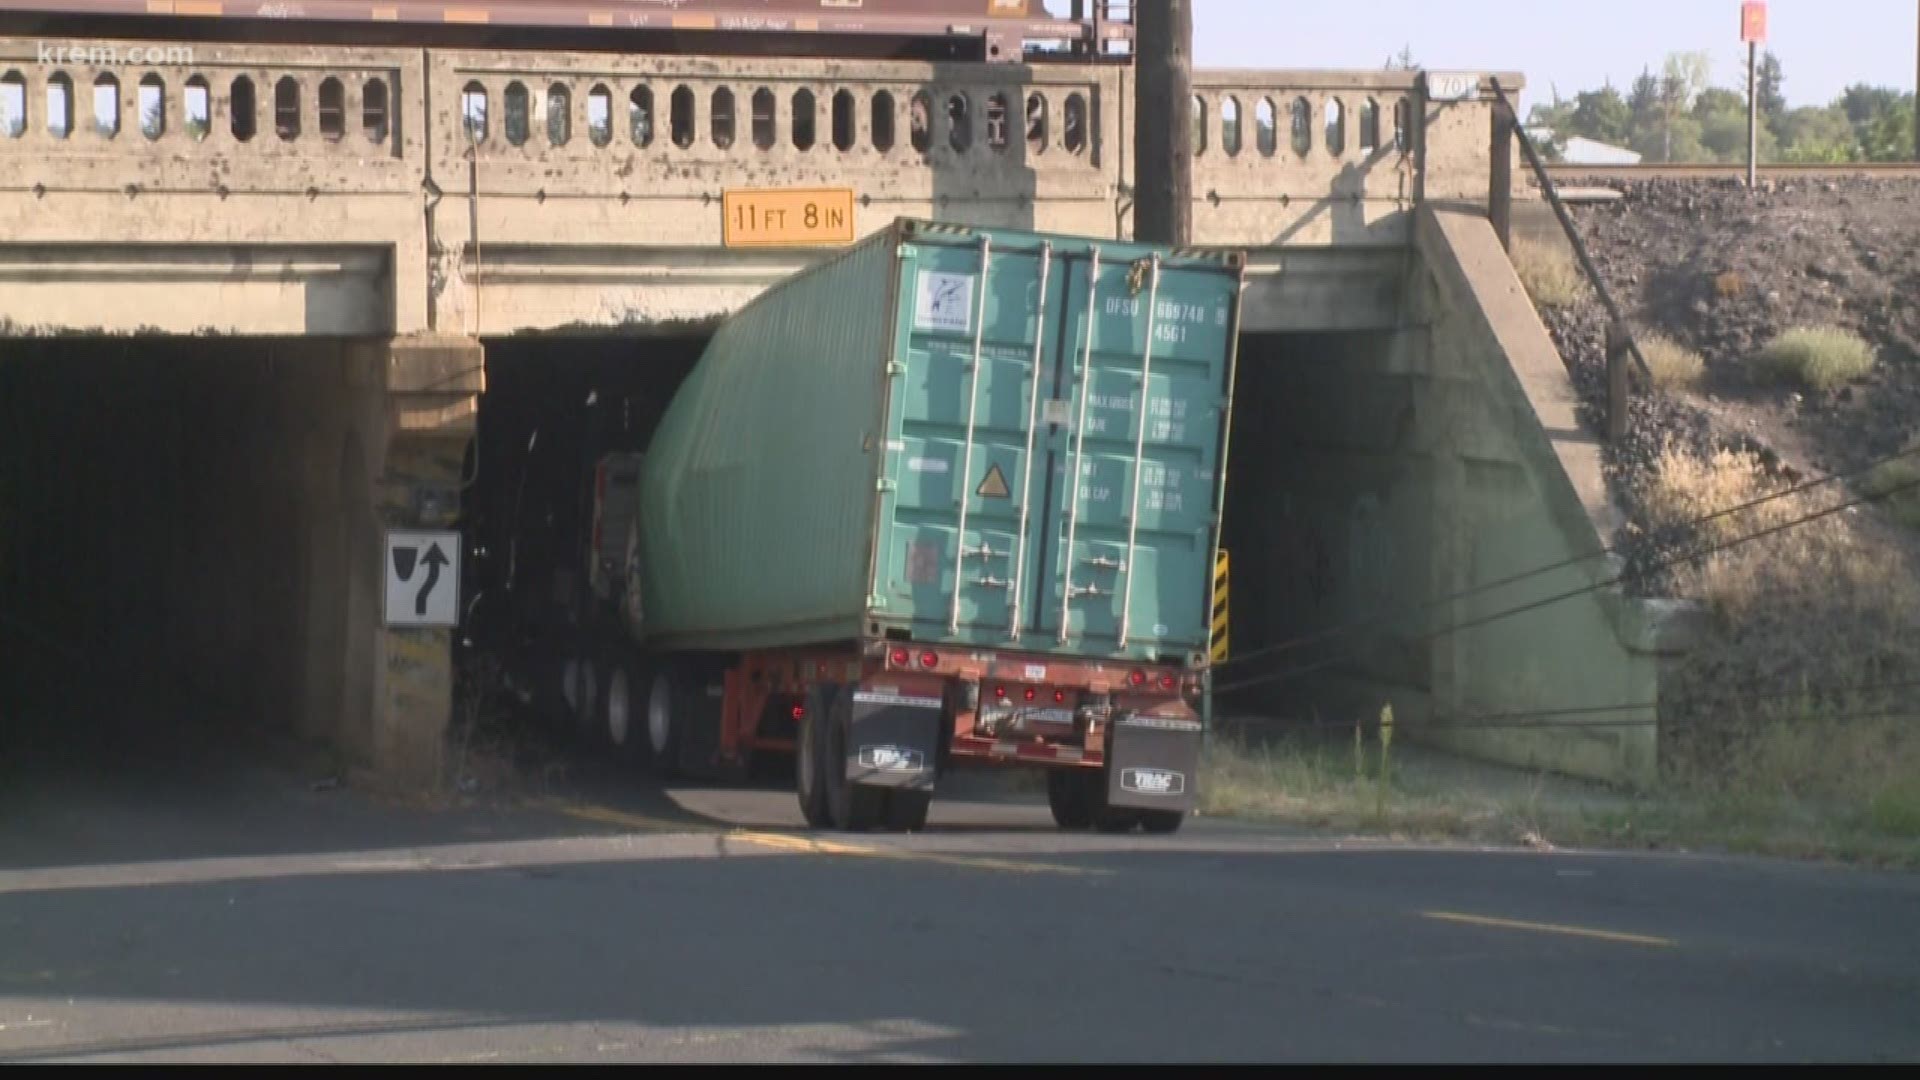 Local truck driver urges drivers to pay attention to bridge heights (8-2-18)